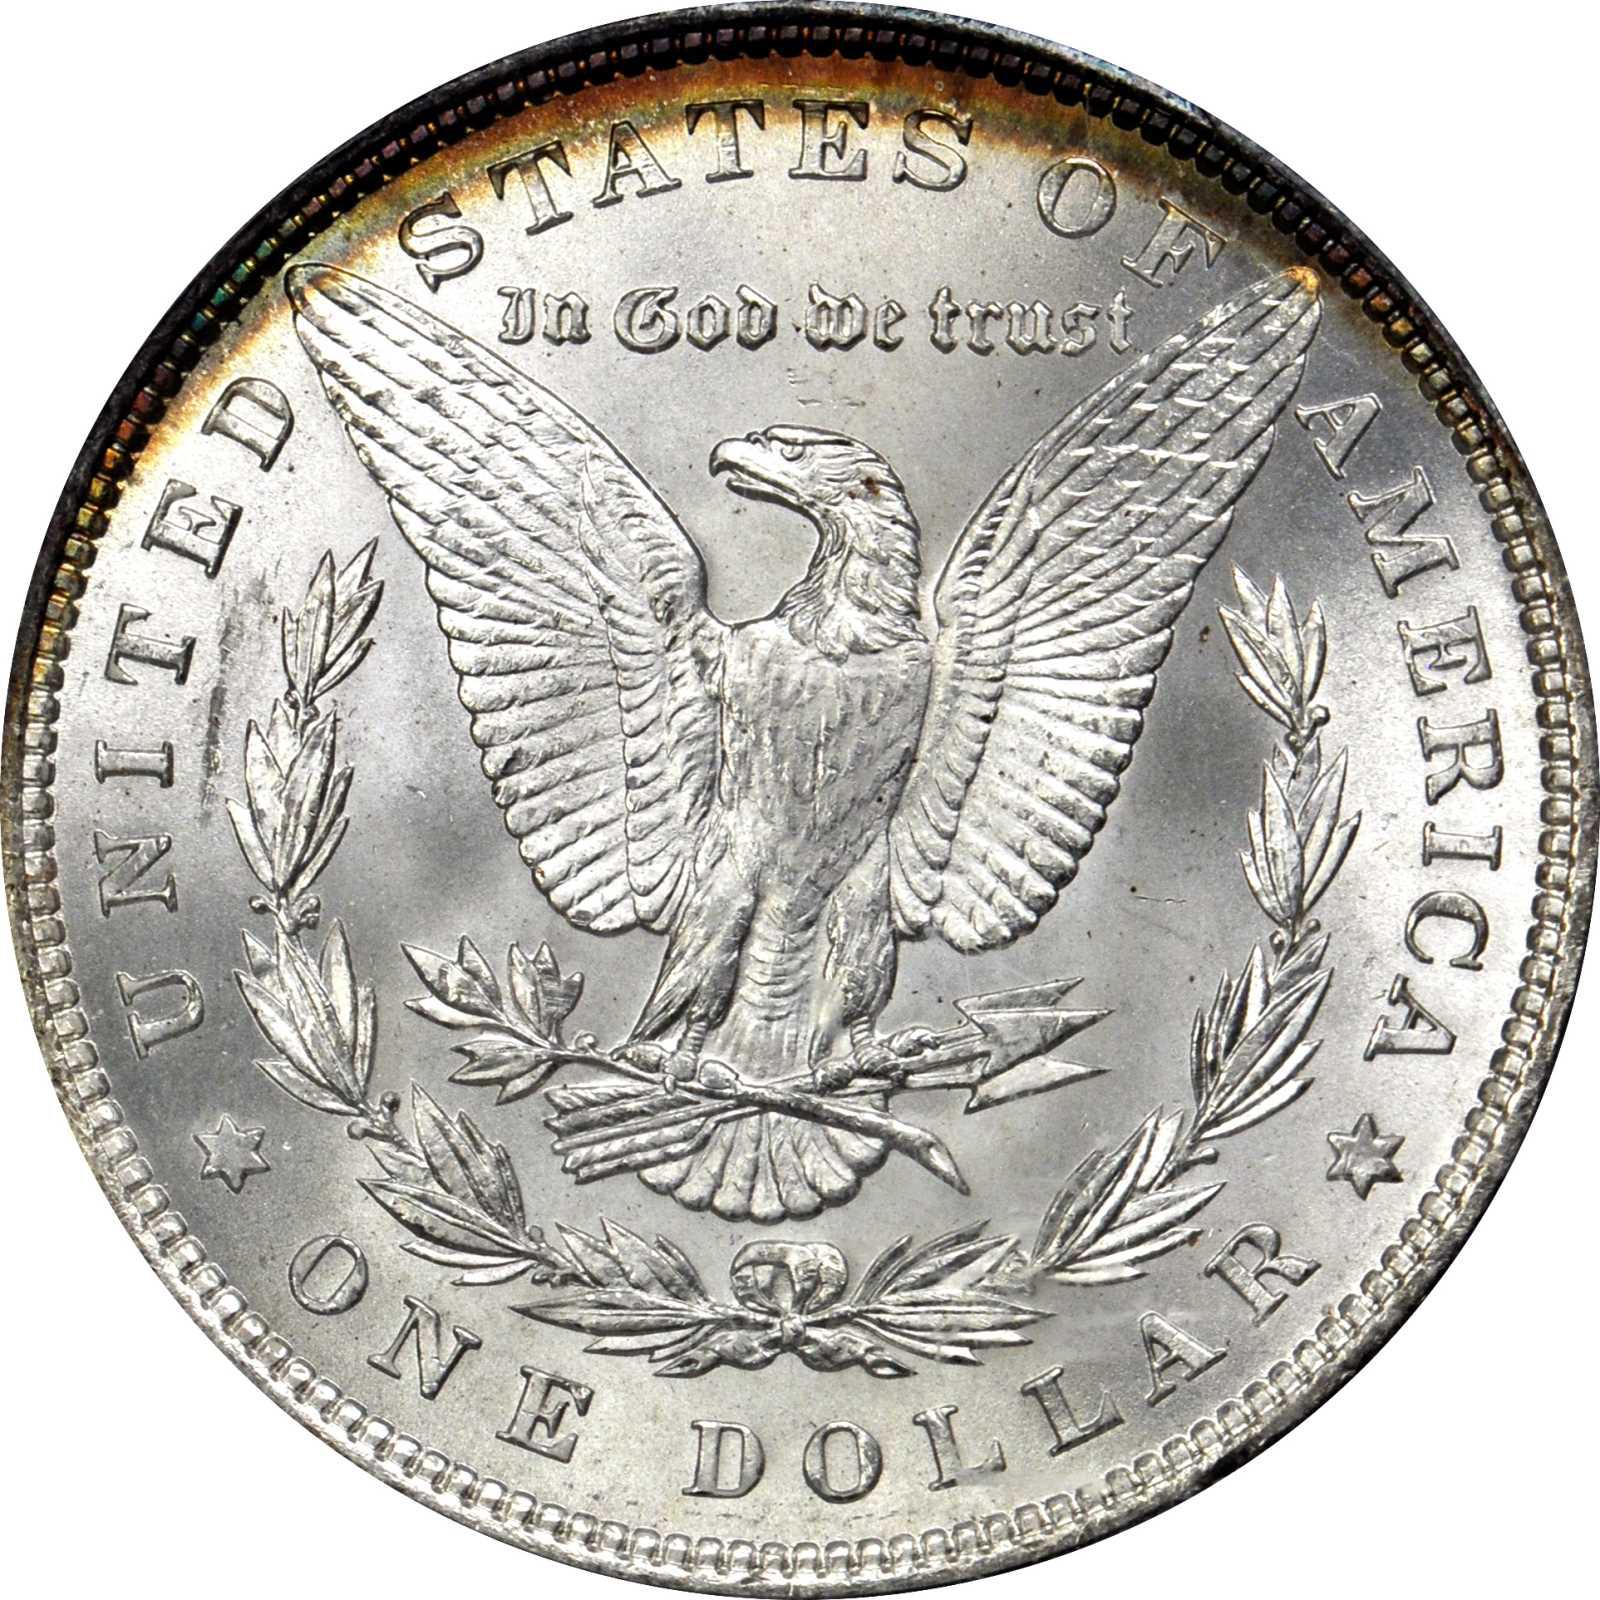 Morgan Silver Dollar Values and Prices - Past Sales | bitcoinhelp.fun